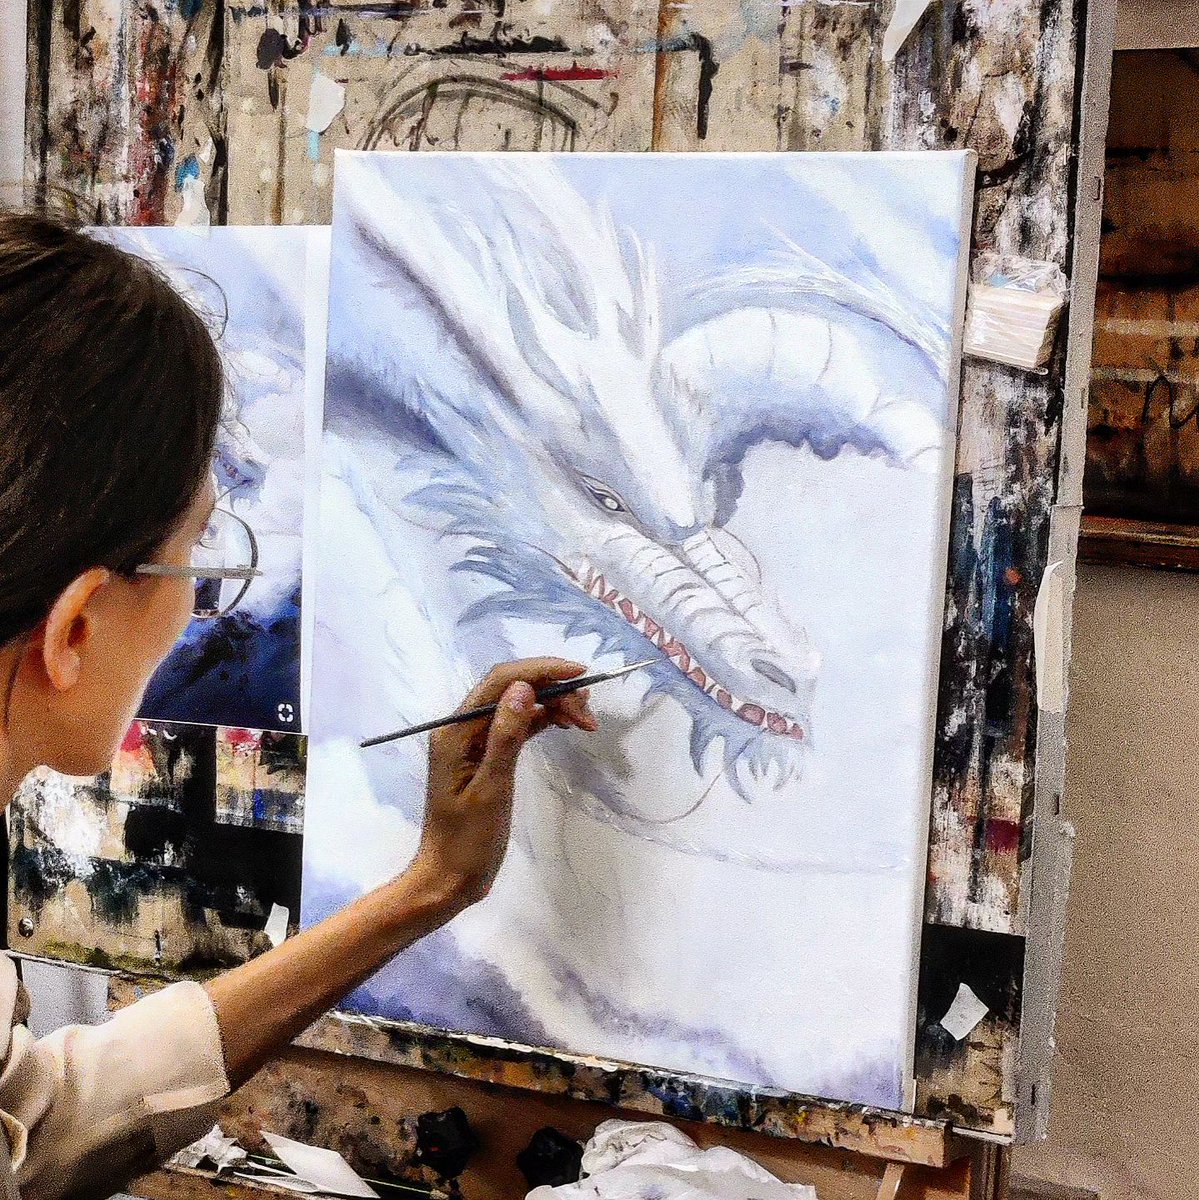 'Fairy tales are more than true: not because they tell us that dragons exist, but because they tell us that dragons can be beaten'
Neil Gaiman
#artlessons #artclass #dragon #accademiadelgiglio #artworkshops #artworkshop #artacademy #artclasses #artcourse #artcourses #artschool